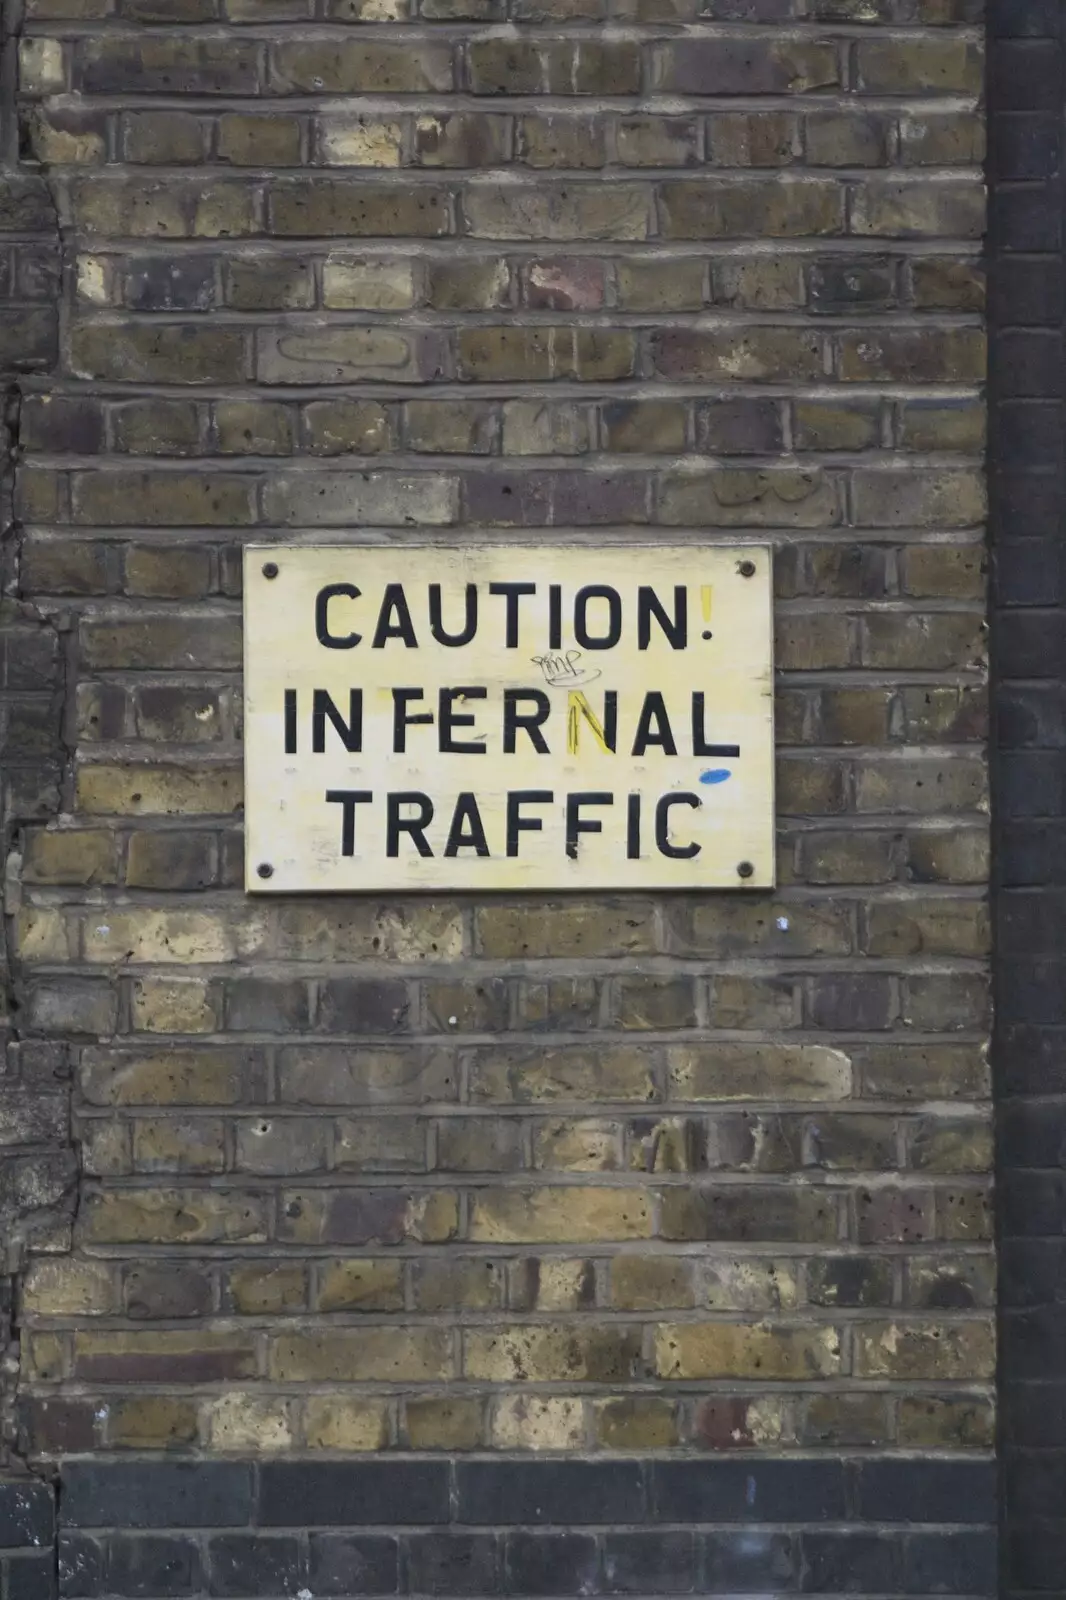 'Caution: infernal traffic', from From East End to East Coast: Brick Lane and Walberswick, London and Suffolk - 9th February 2007